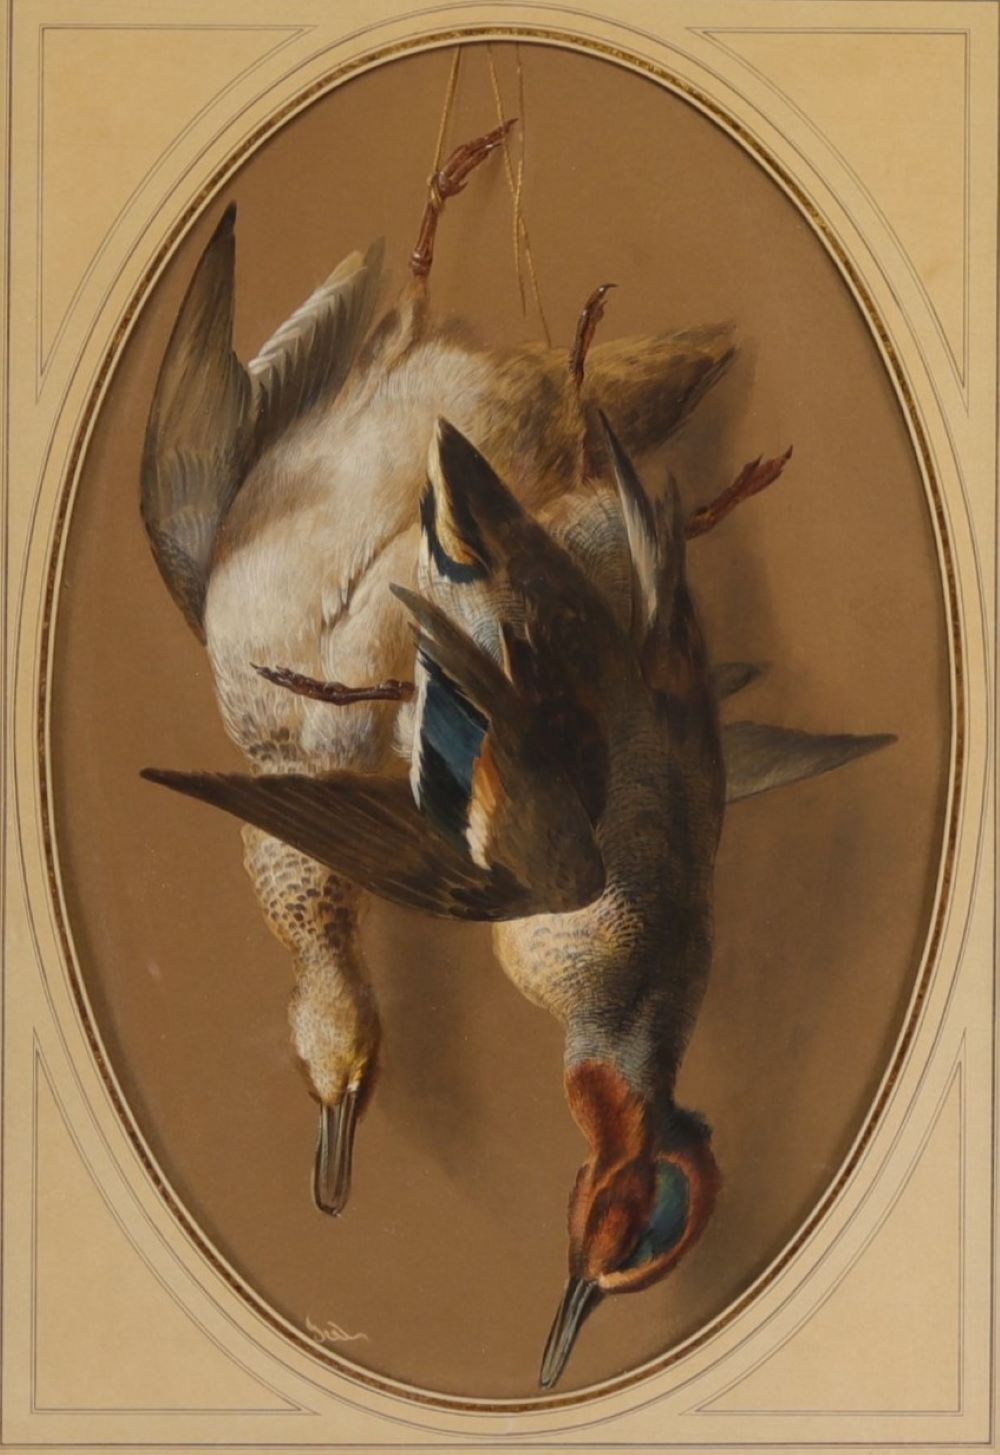 W. DENTER "Ducks" Hunting trophy, watercolour and pastel, late 19th century.